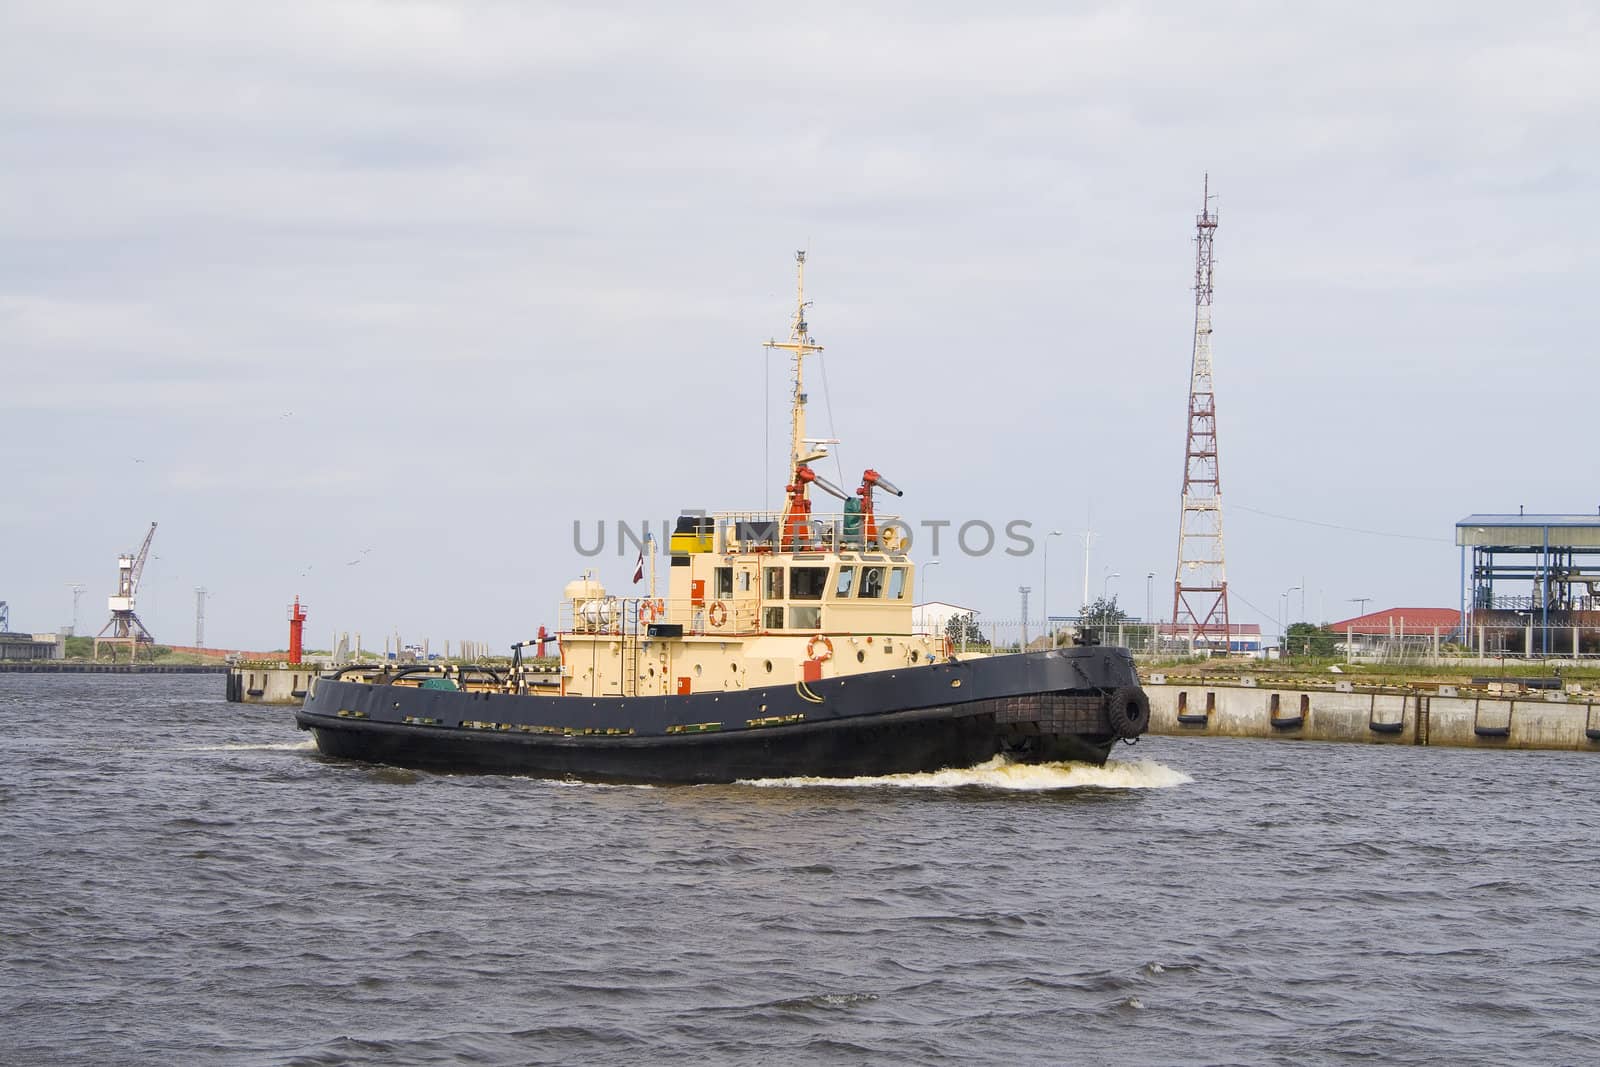 One of tugboats near the ferry terminal in the harbor in Ventspils, Latvia.